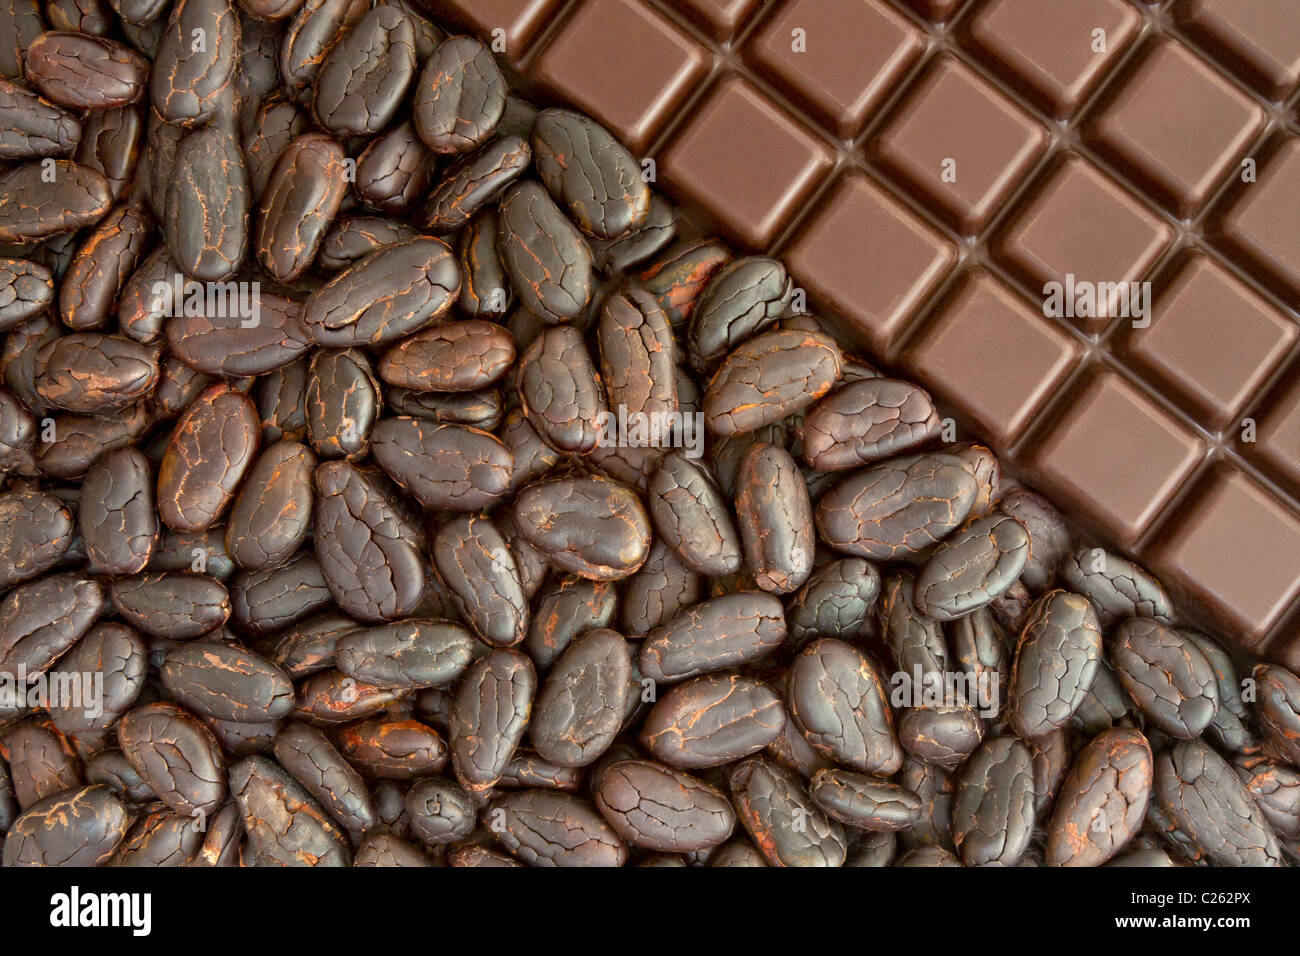 Bar of chocolate, and cocoa beans Stock Photo